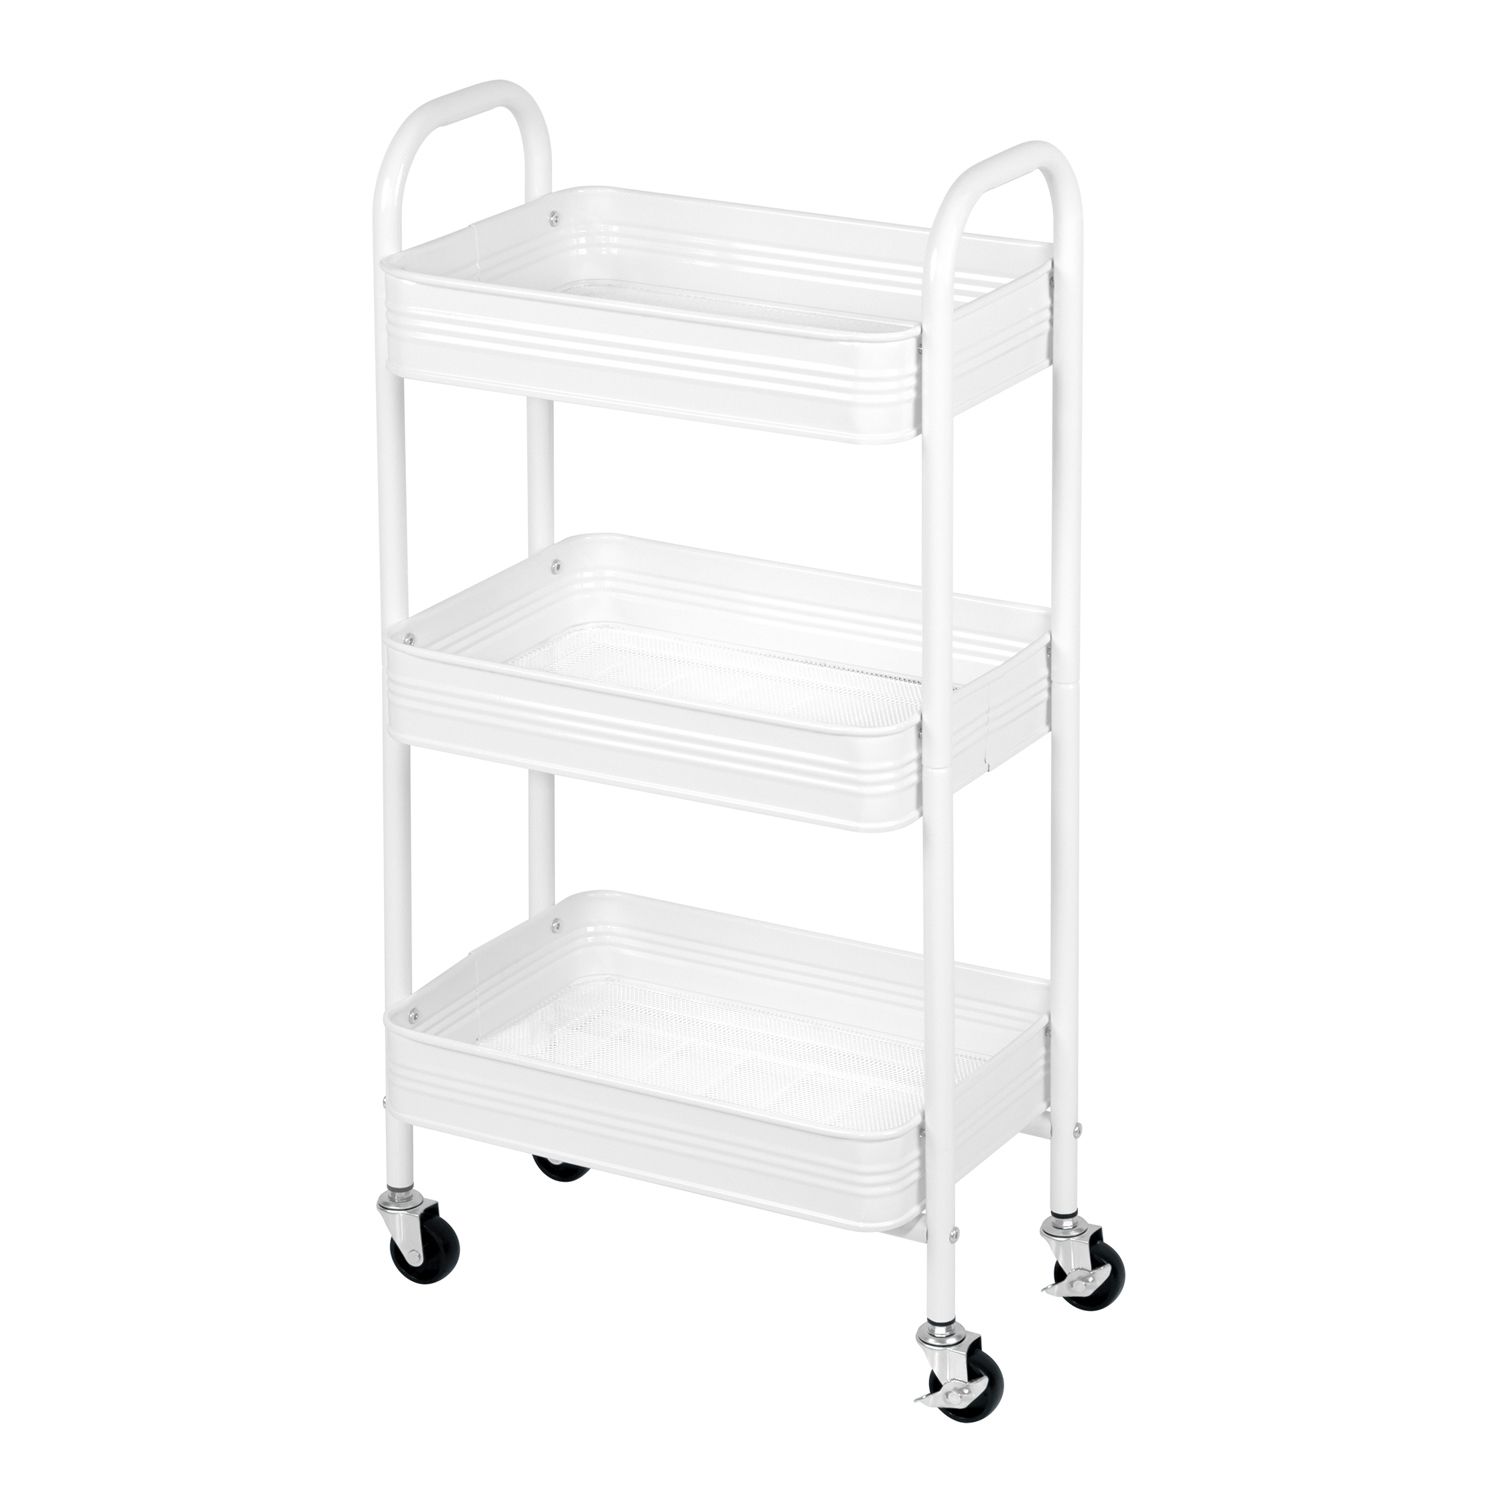 Image for EAST BANK DESIGNS East Bank Designs 3-Tier Cart at Kohl's.